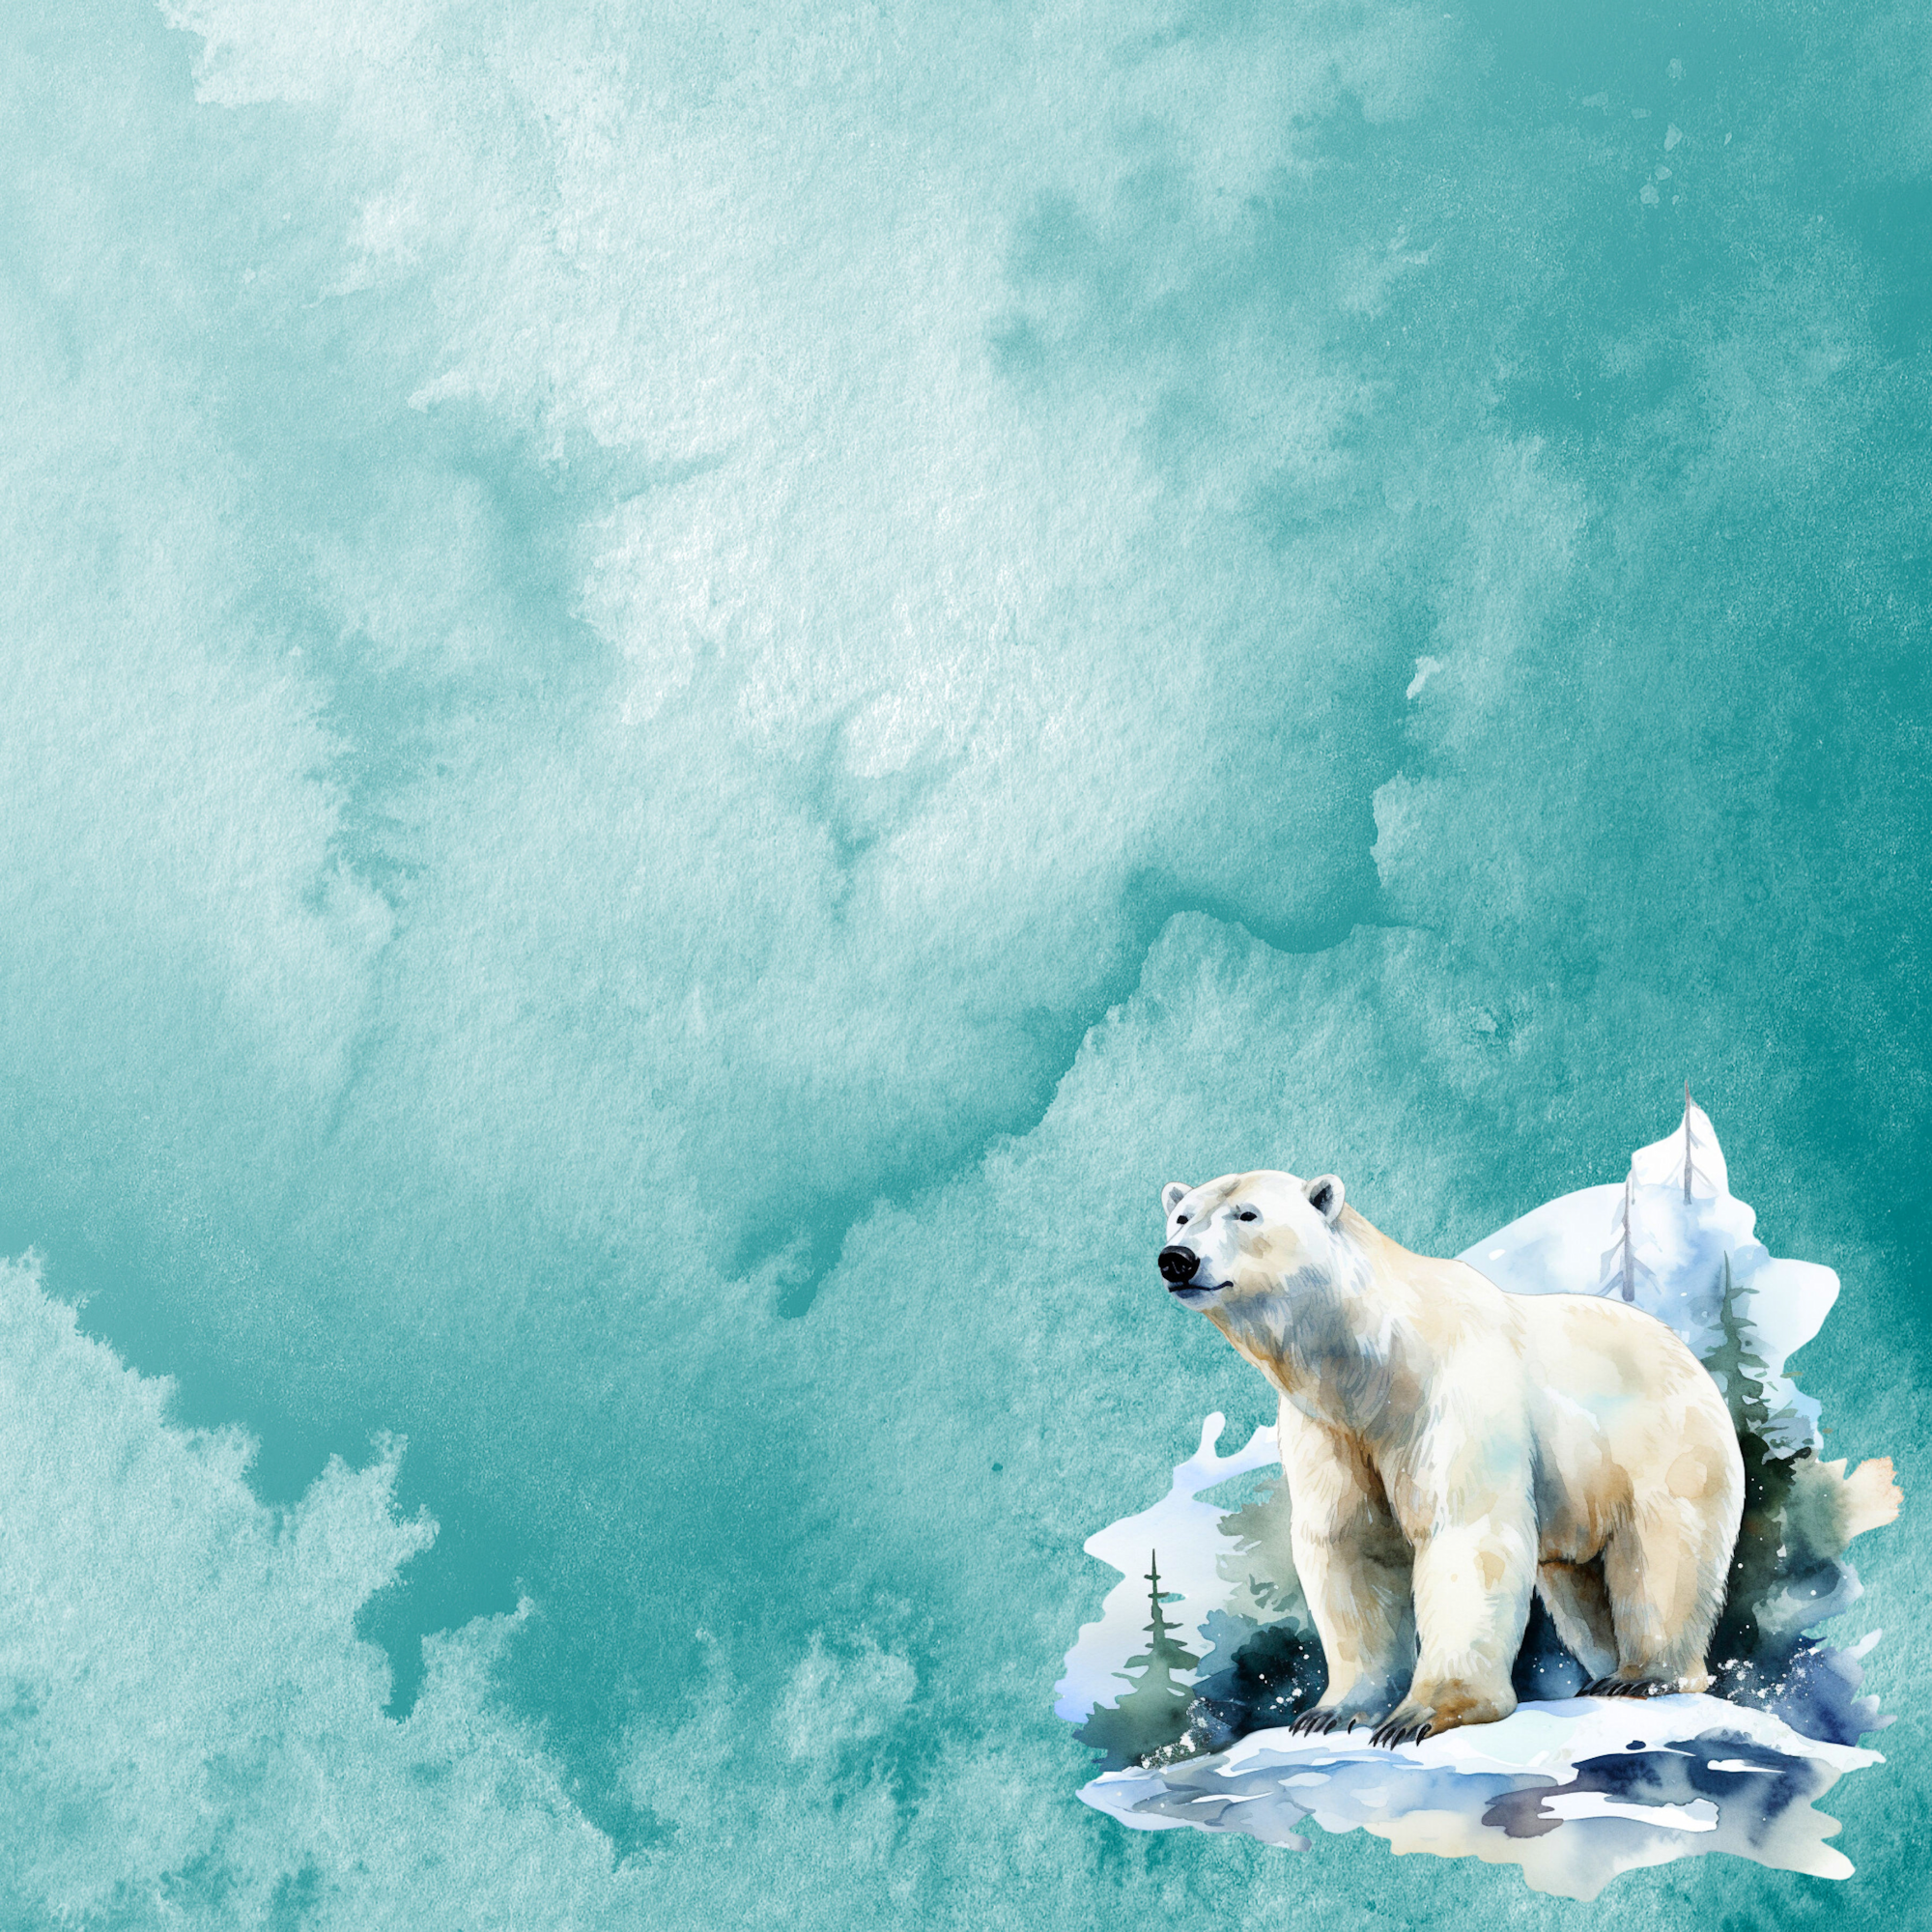 Watercolor Wildlife Collection Polar Bear 12 x 12 Double-Sided Scrapbook Paper by SSC Designs